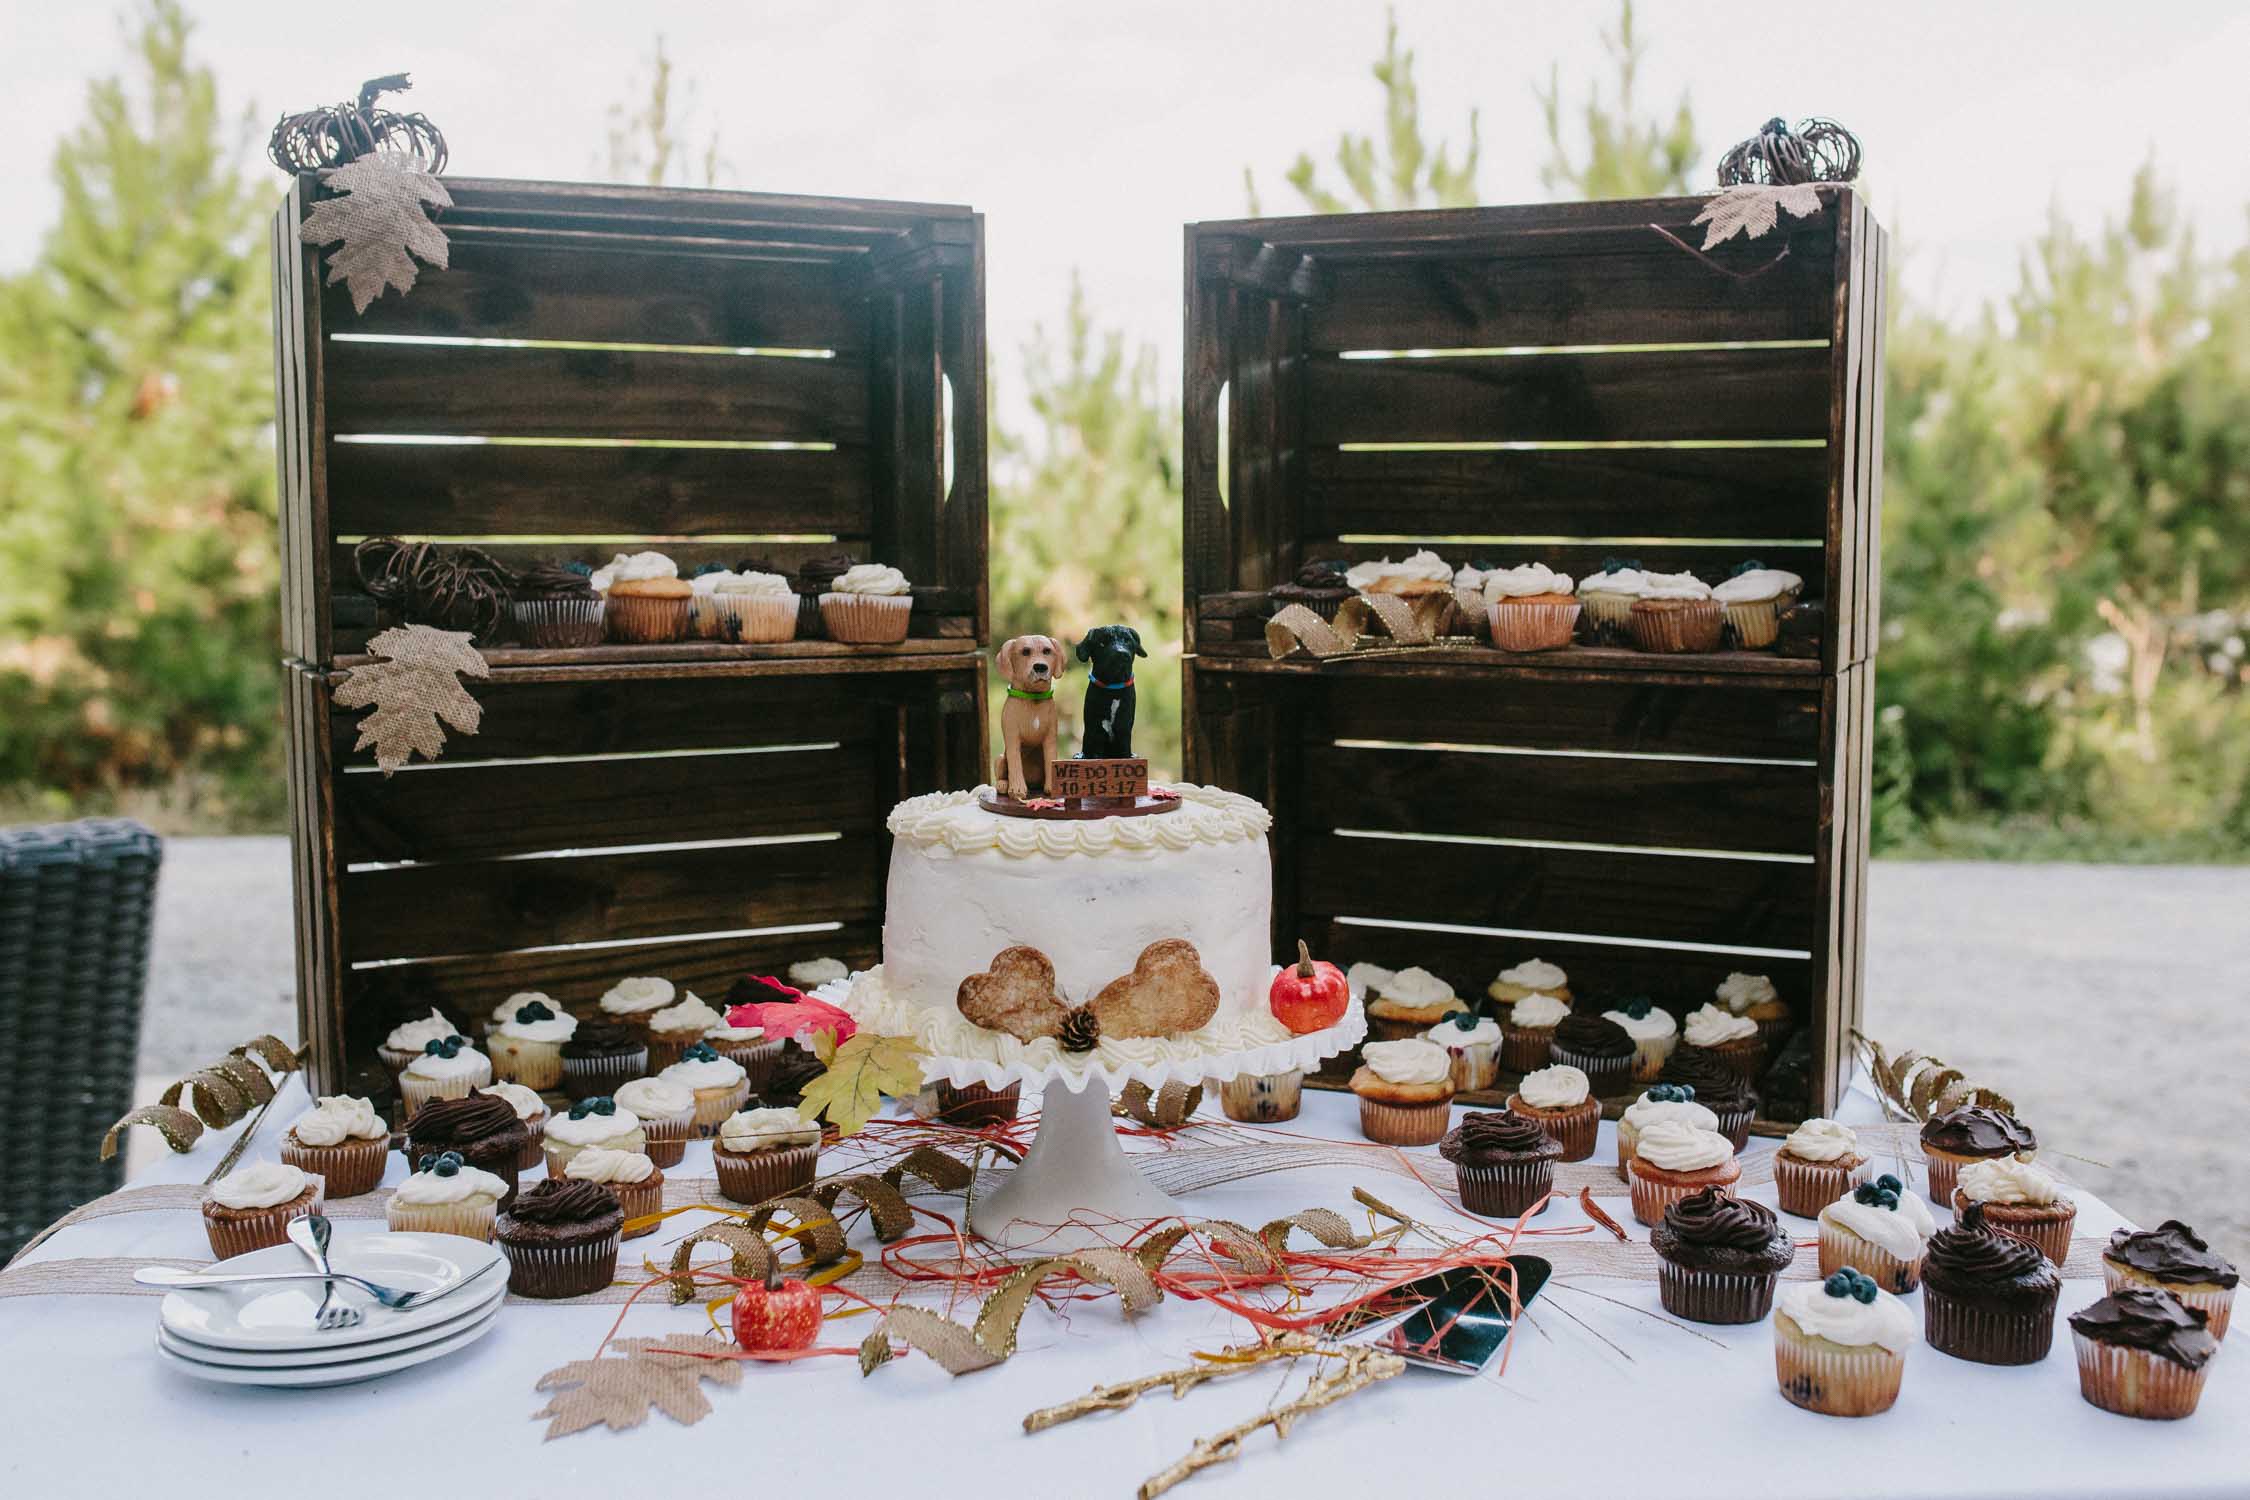 A fall themed dessert table features 4 dark stained wooden crates holding cupcakes and fall leaves. In front of the crates sits a white, two tiered cake with 2 dog figurines on top.